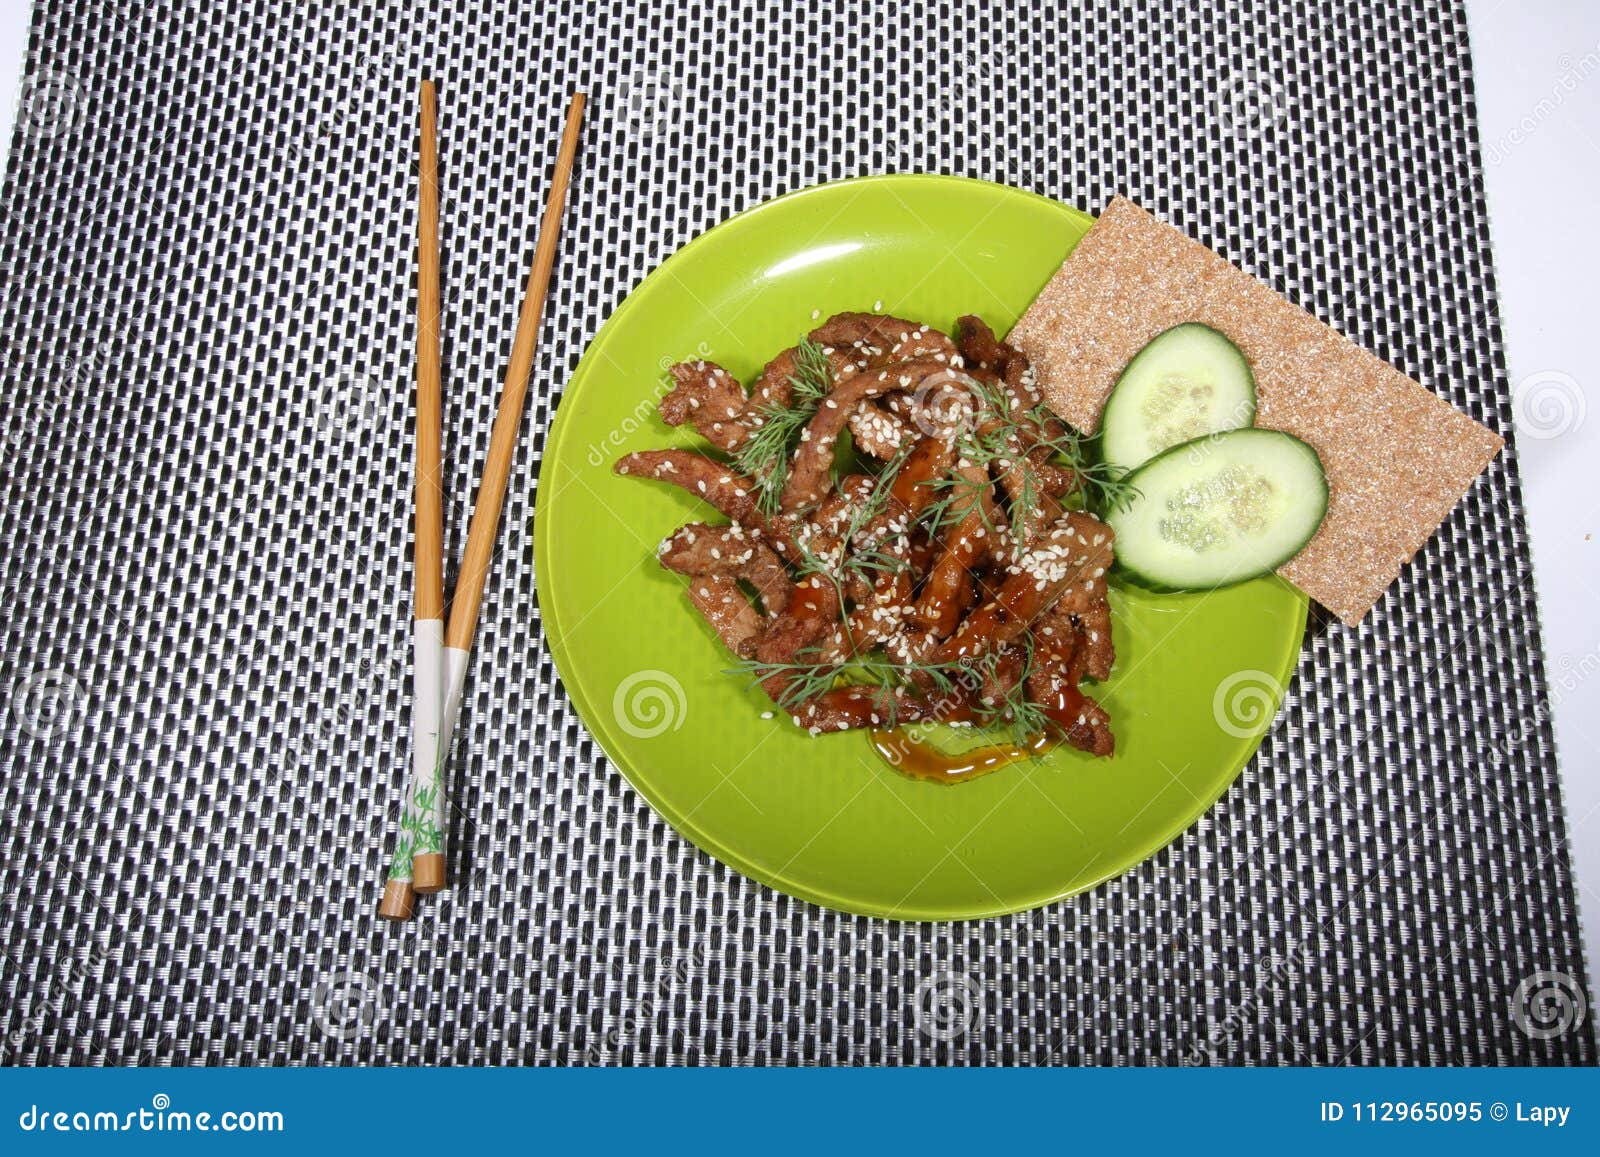 pork in teriyaki sauce with slices of cucumber with cucumber slices and bread